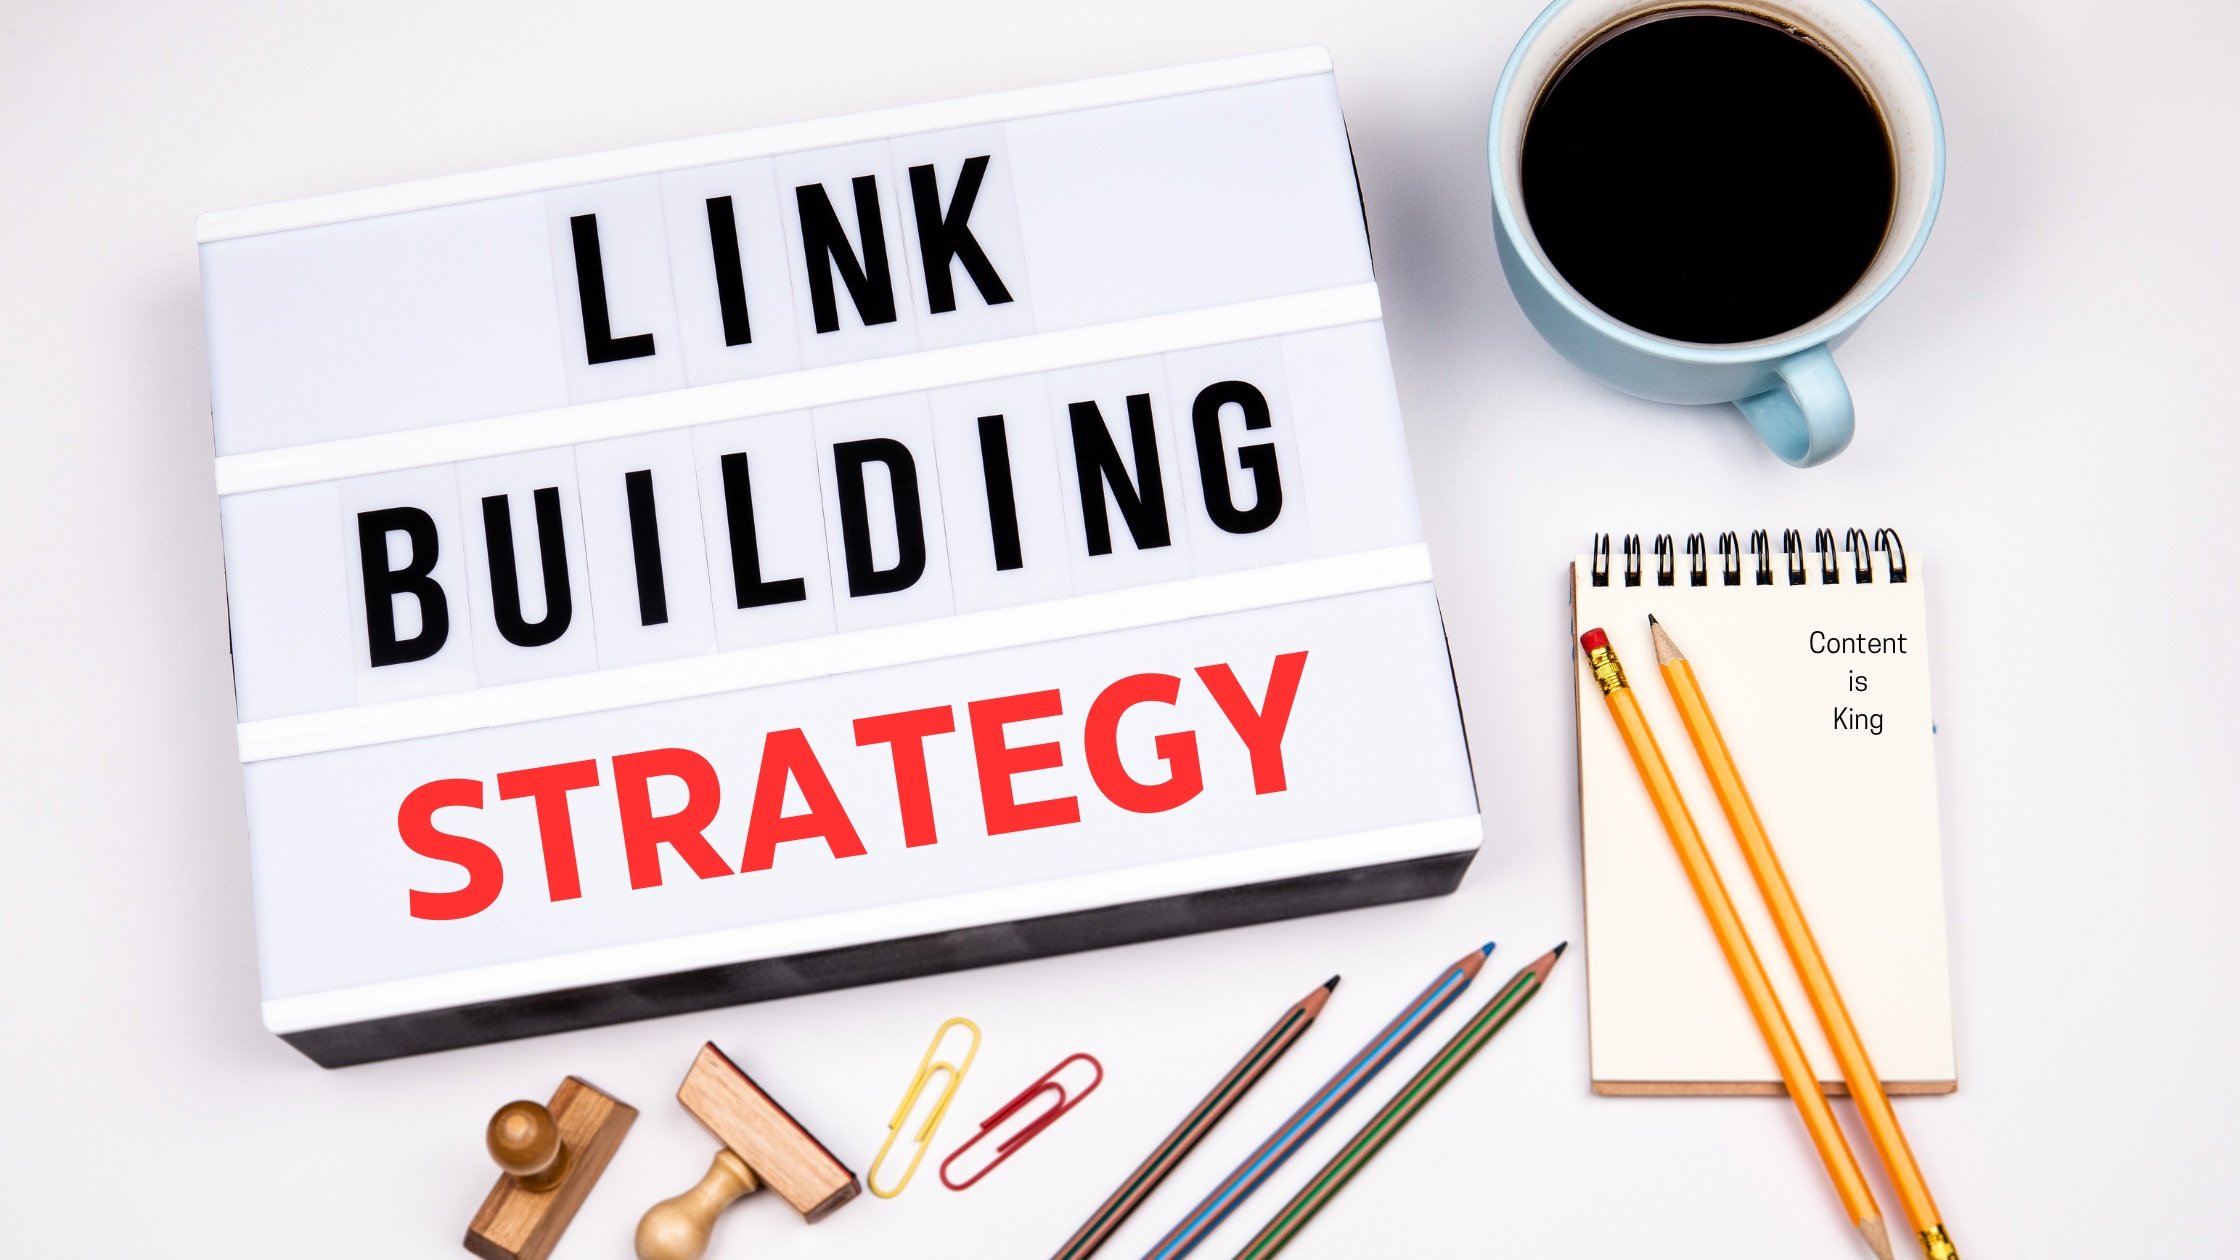 How Our Client Increased Their Backlink Count by Nearly 1,000% with Content-Driven Link Building